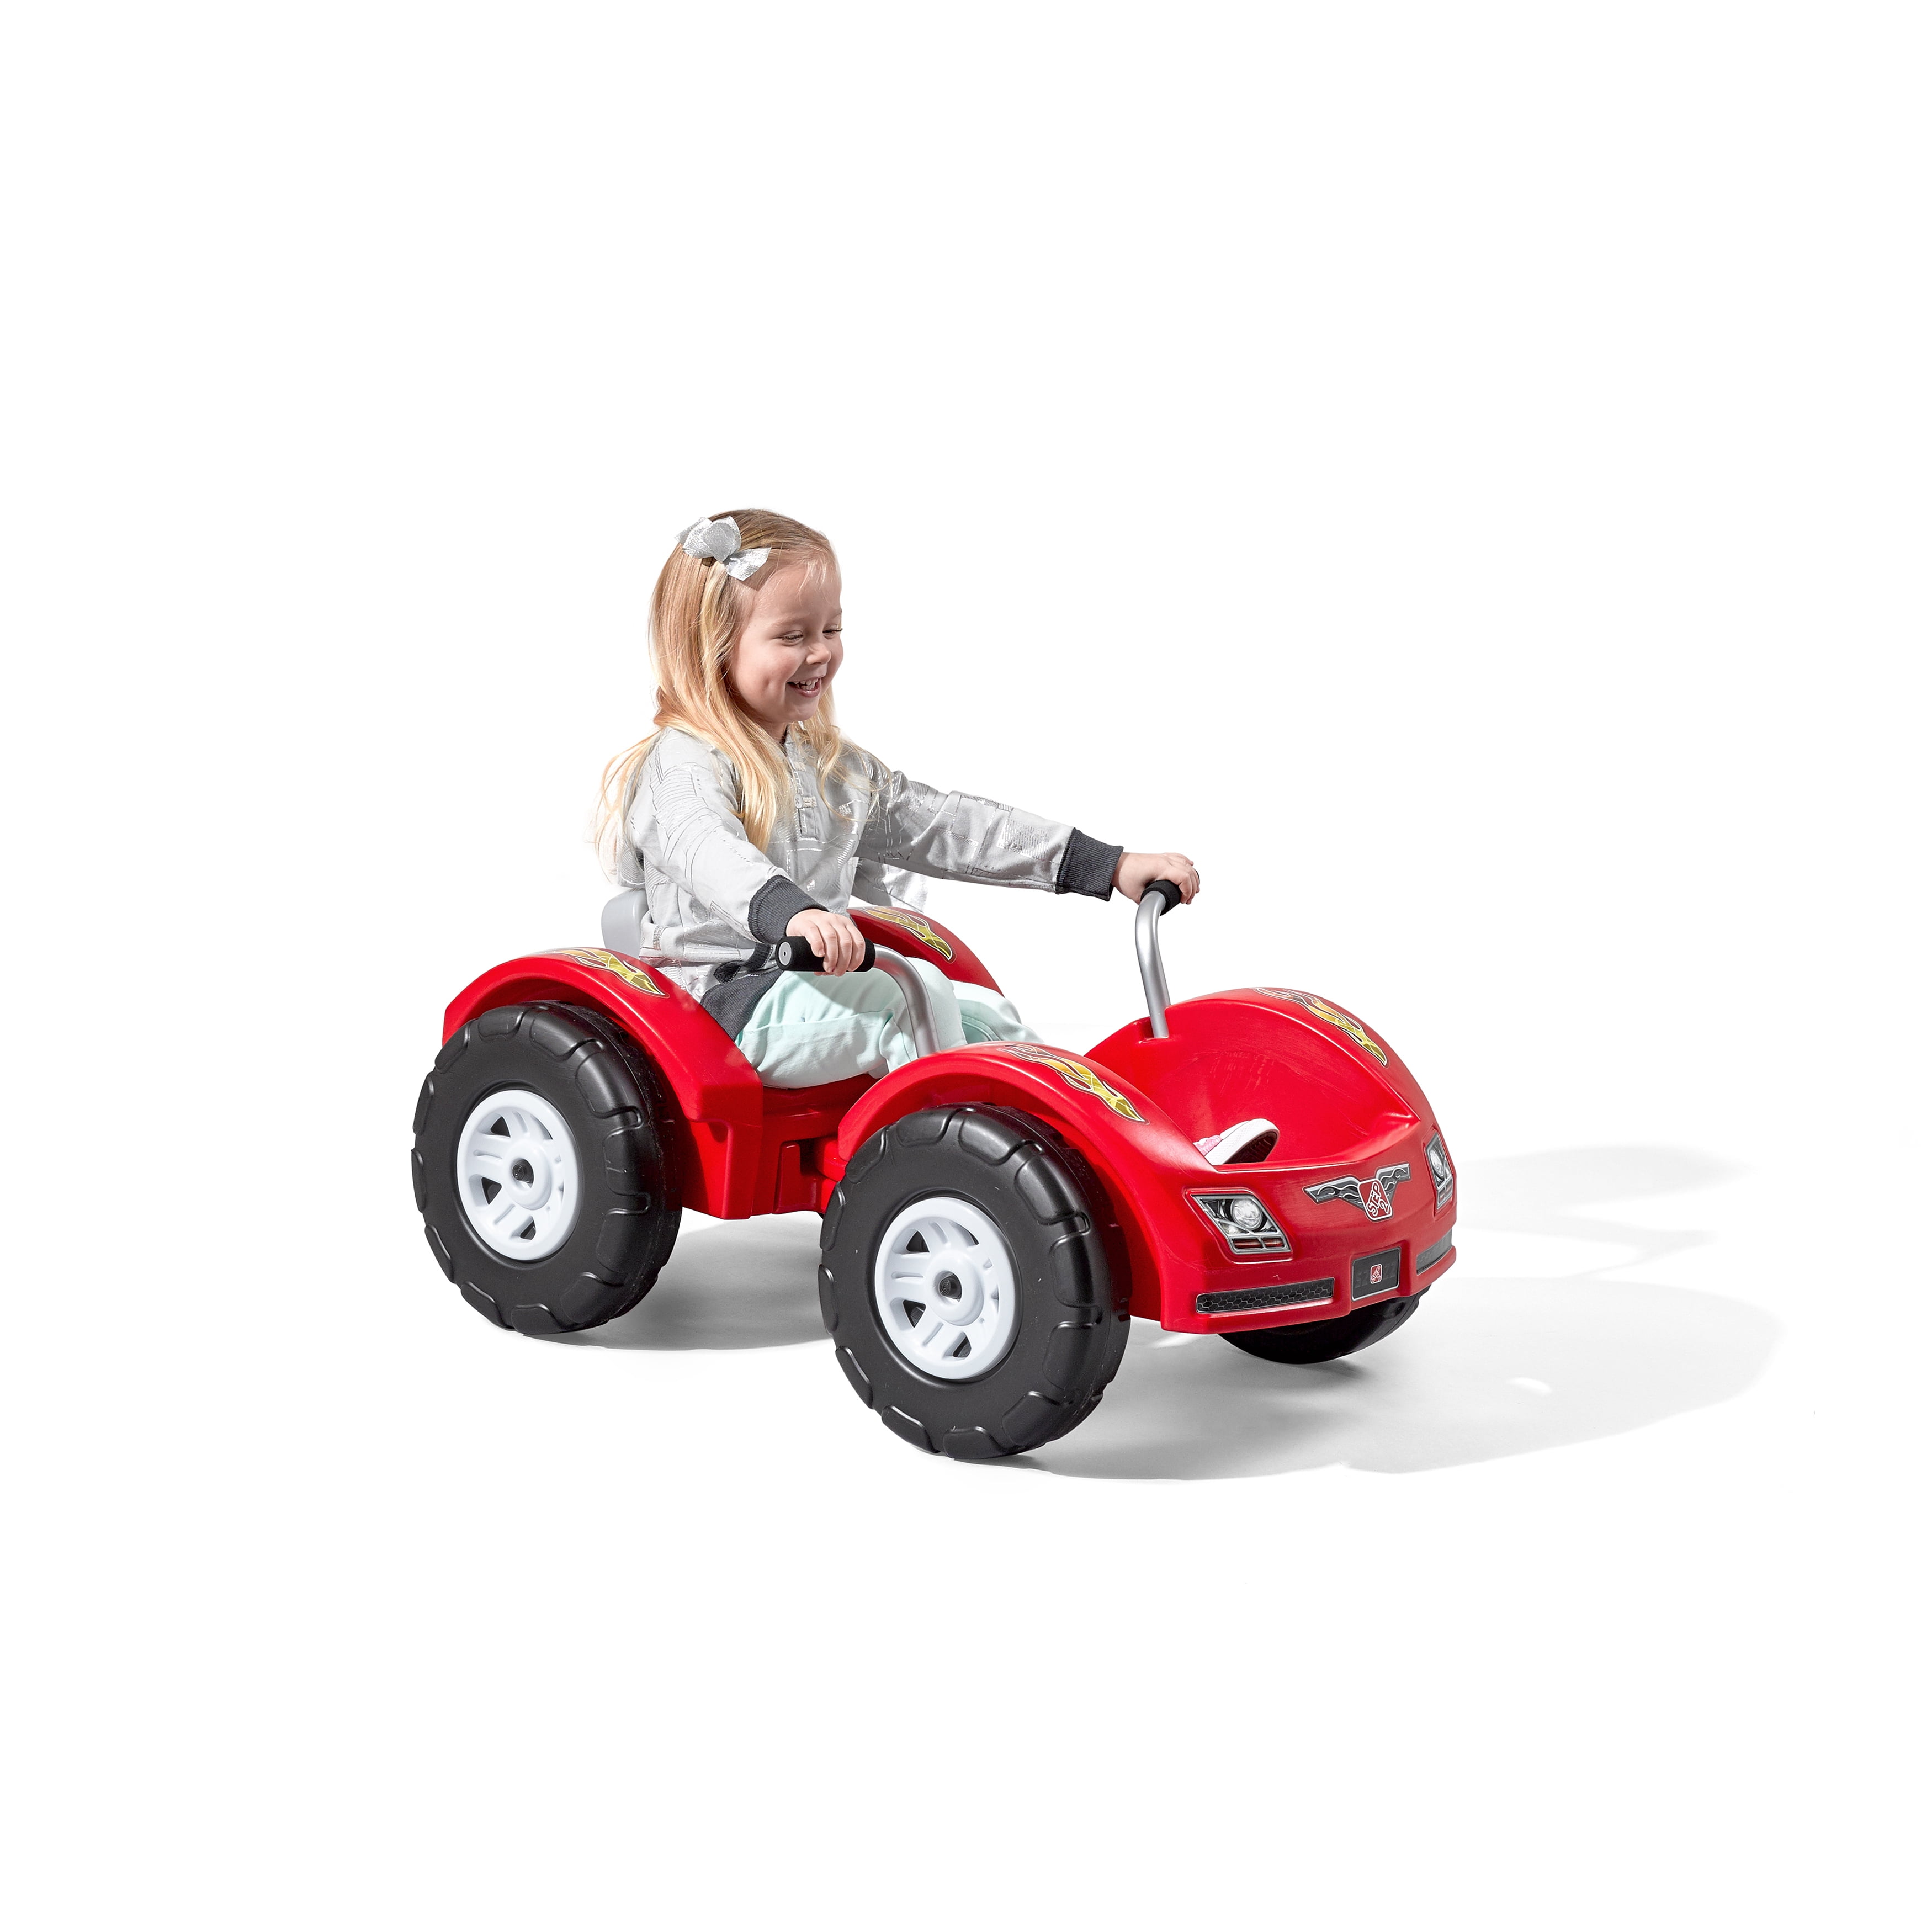 Little Tikes Jett Car Racer Ride-on Pedal Car in Black and Red 